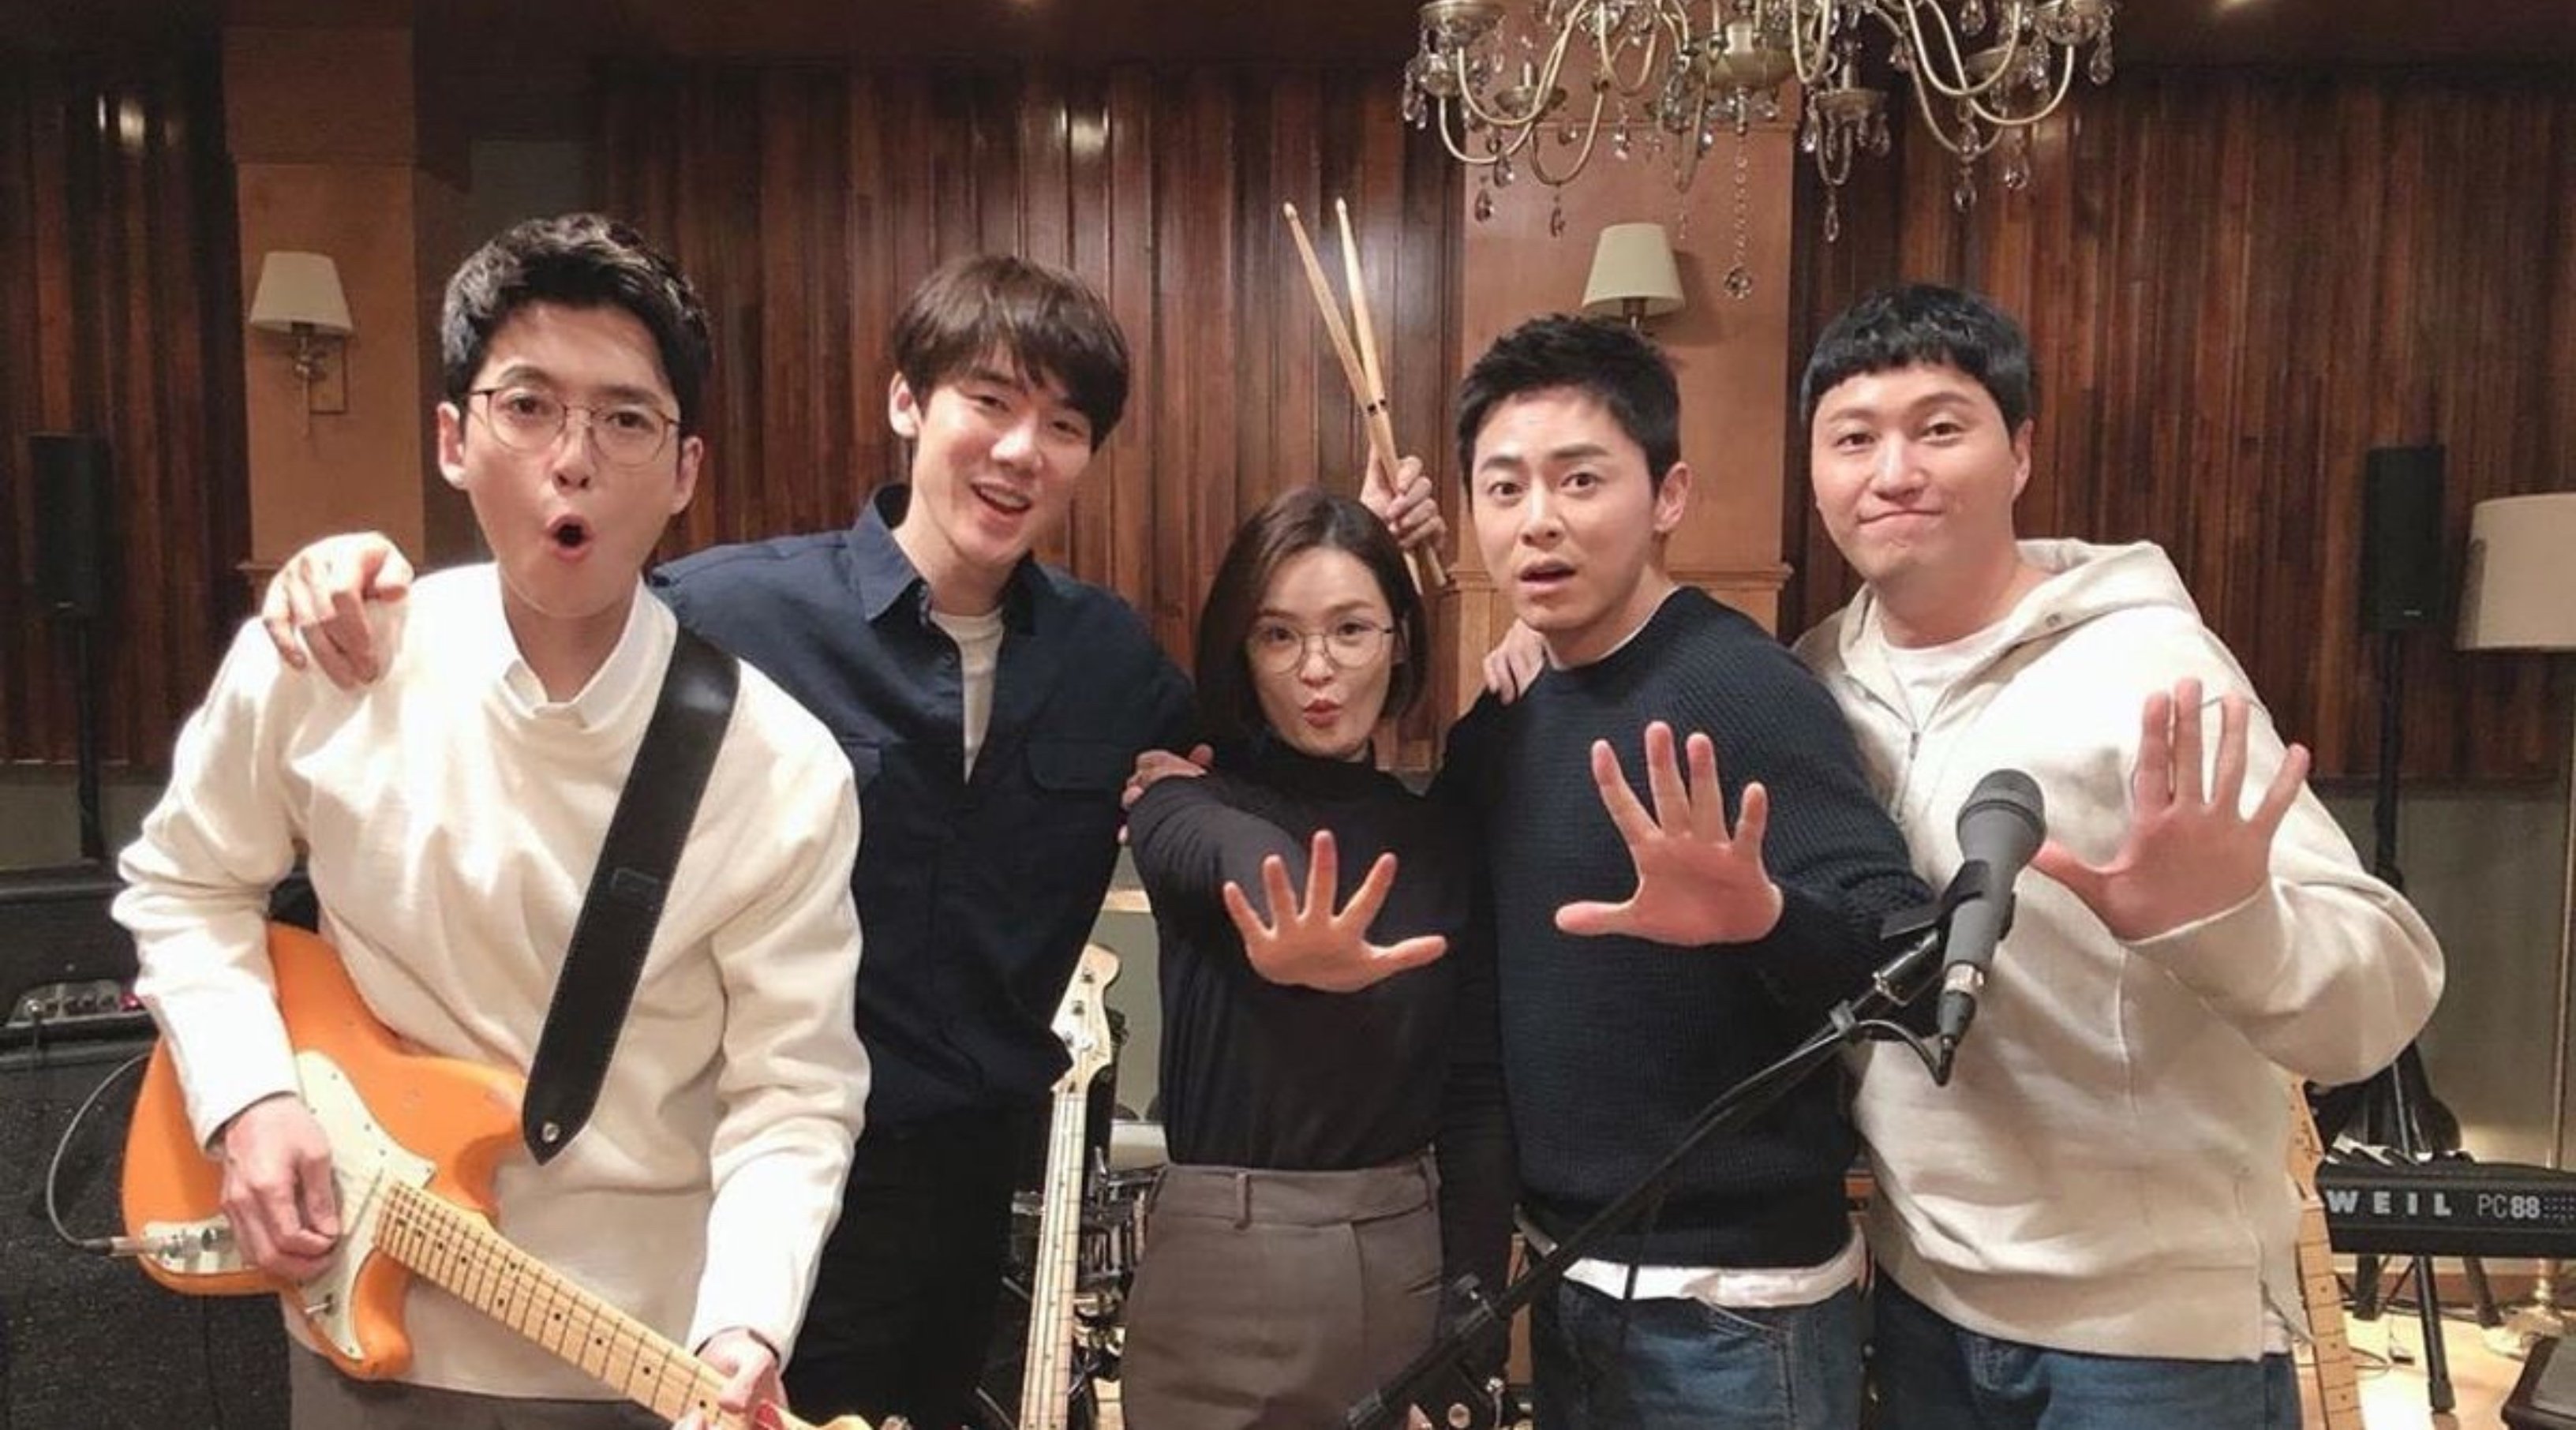 'Hospital Playlist' main cast in plain clothes holding musical instruments